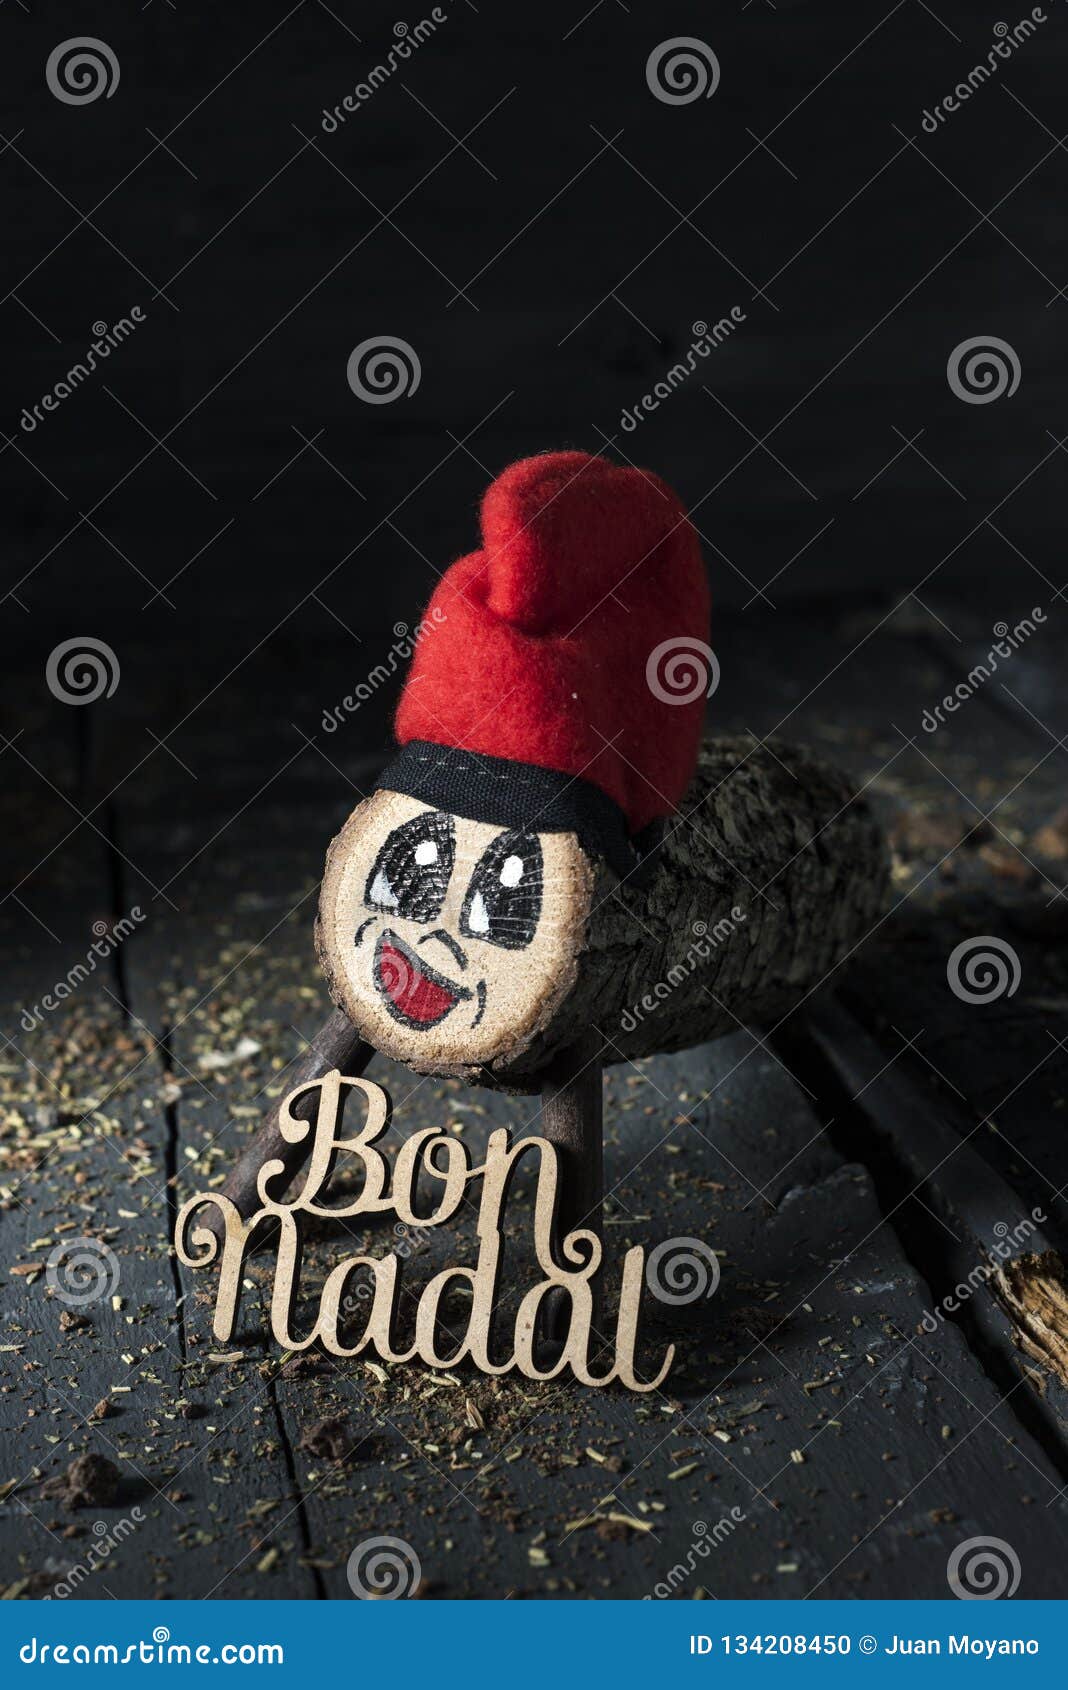 tio de nadal and text merry christmas in catalan